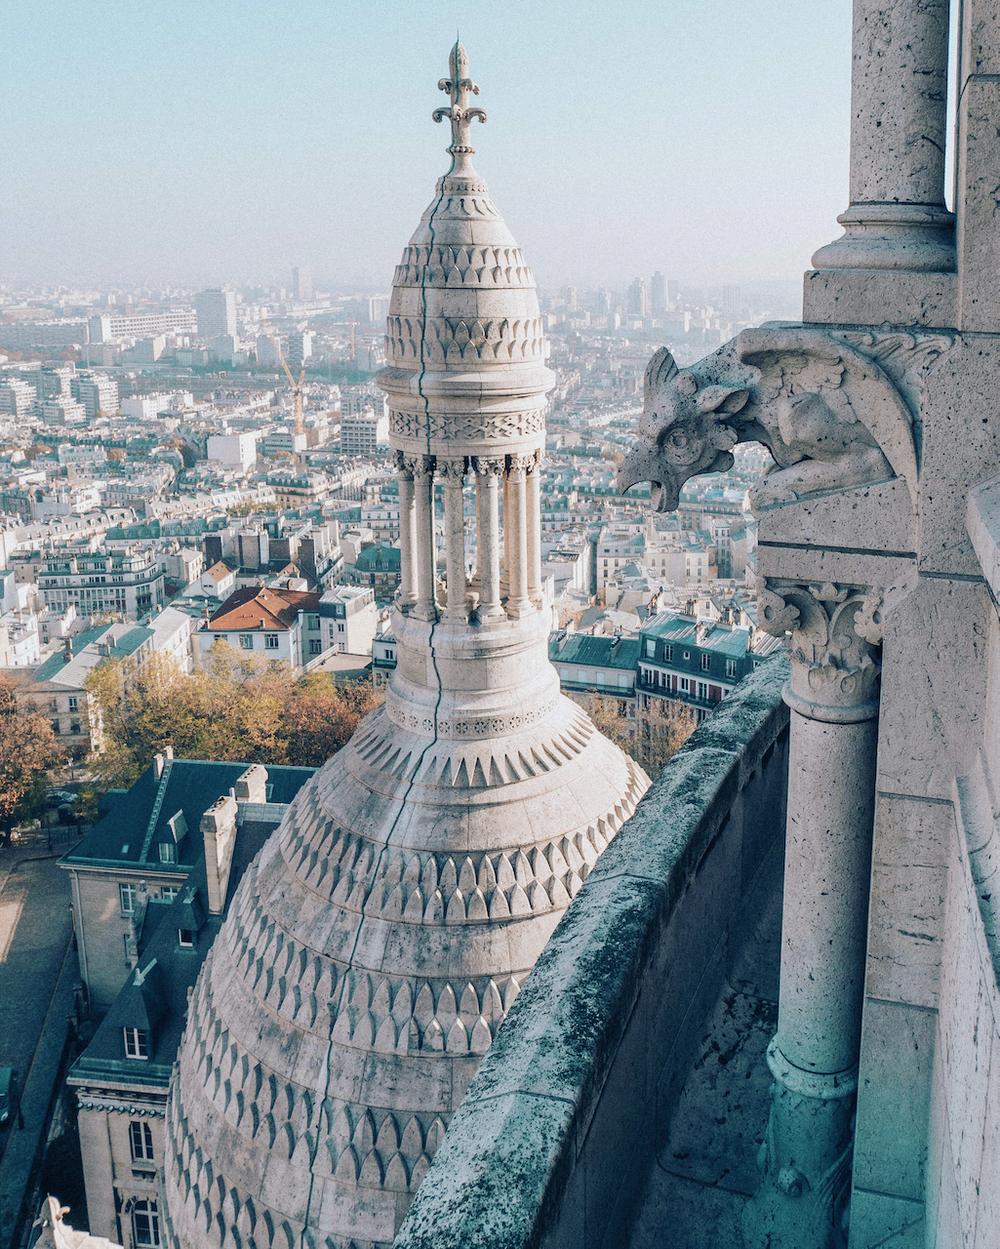 View from the dome of the Sacre-Coeur - Panoramic Paris View - Paris - France